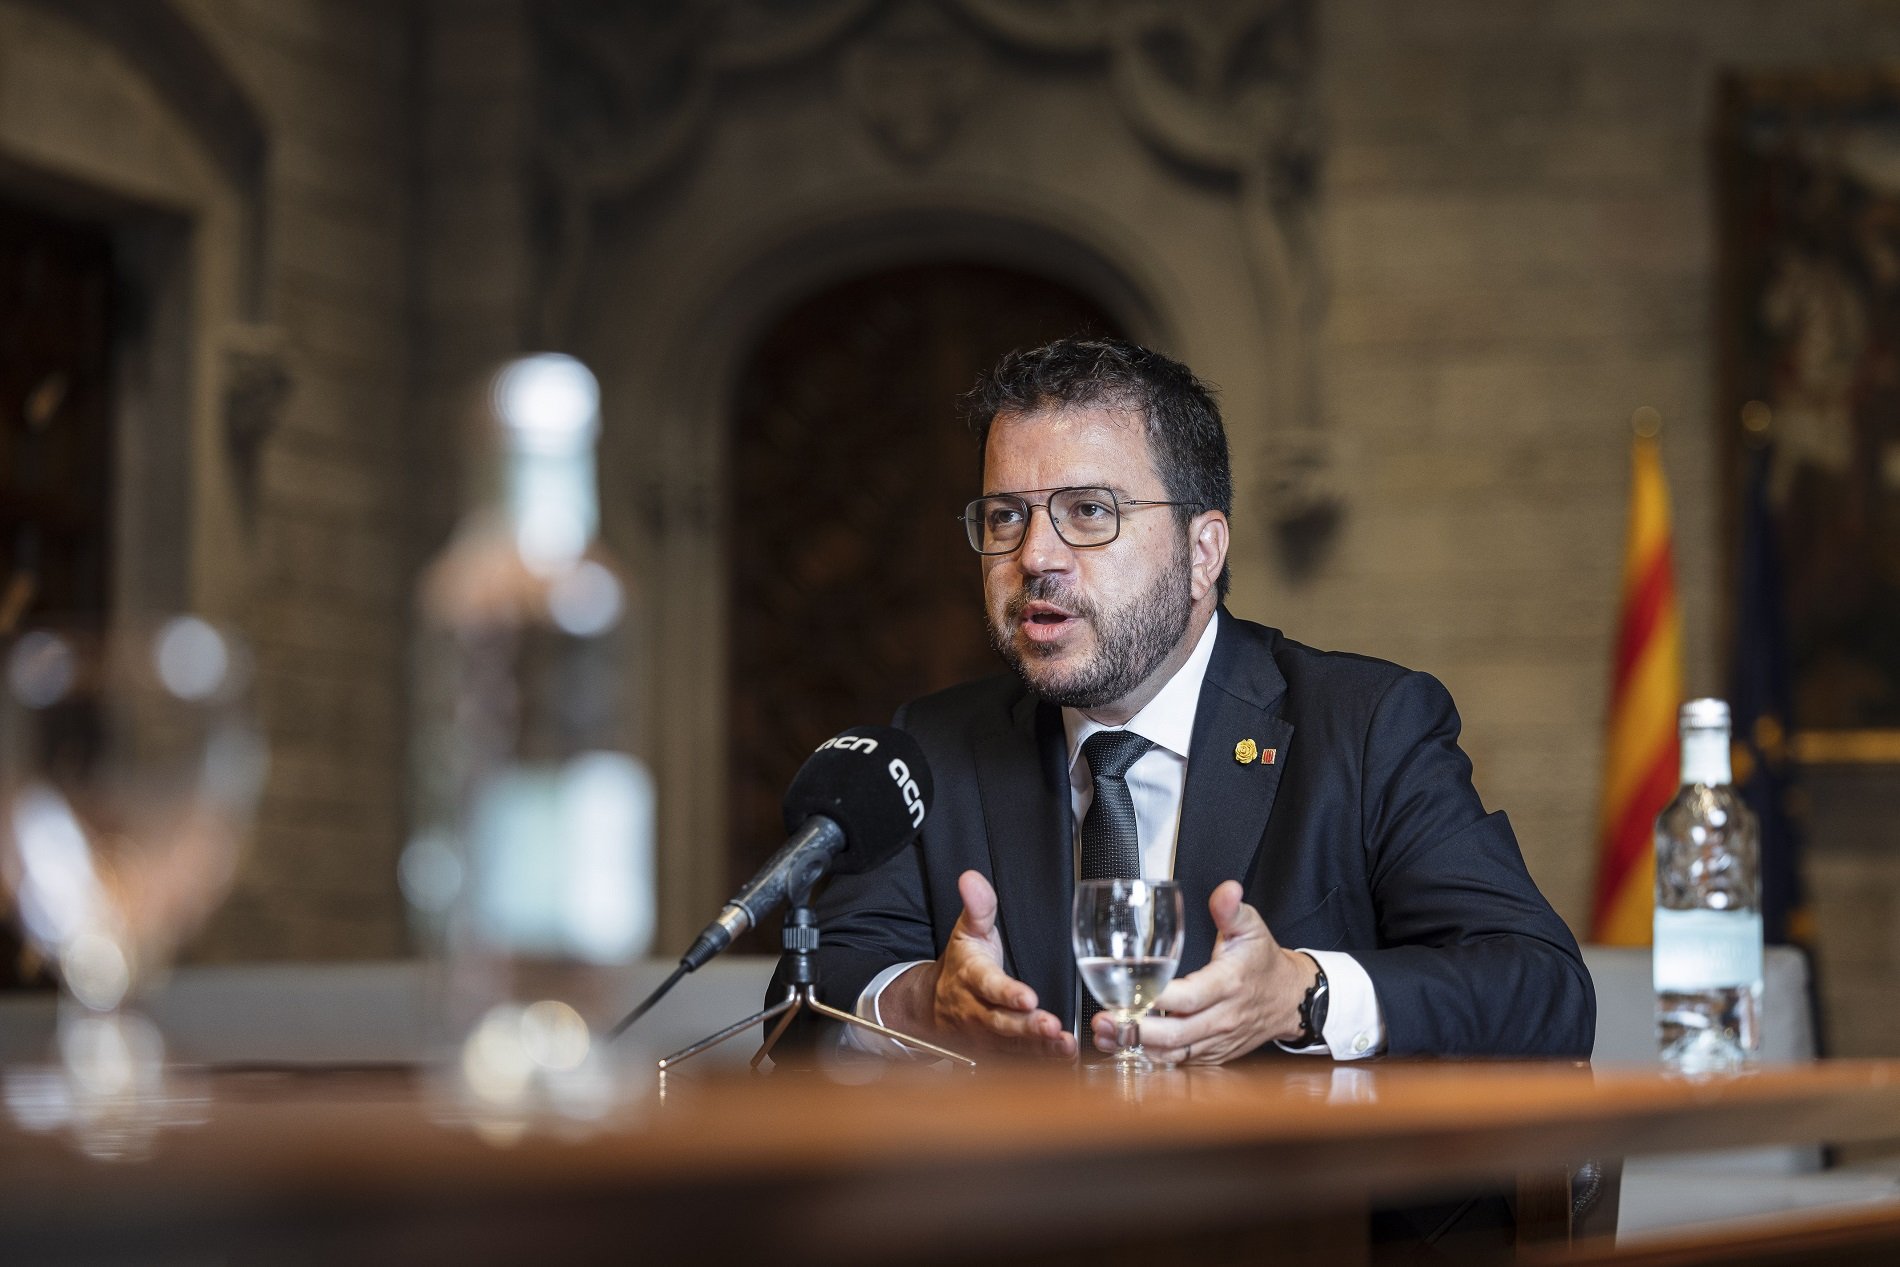 Aragonès to make a "broad proposal" for Catalan self-determination in September